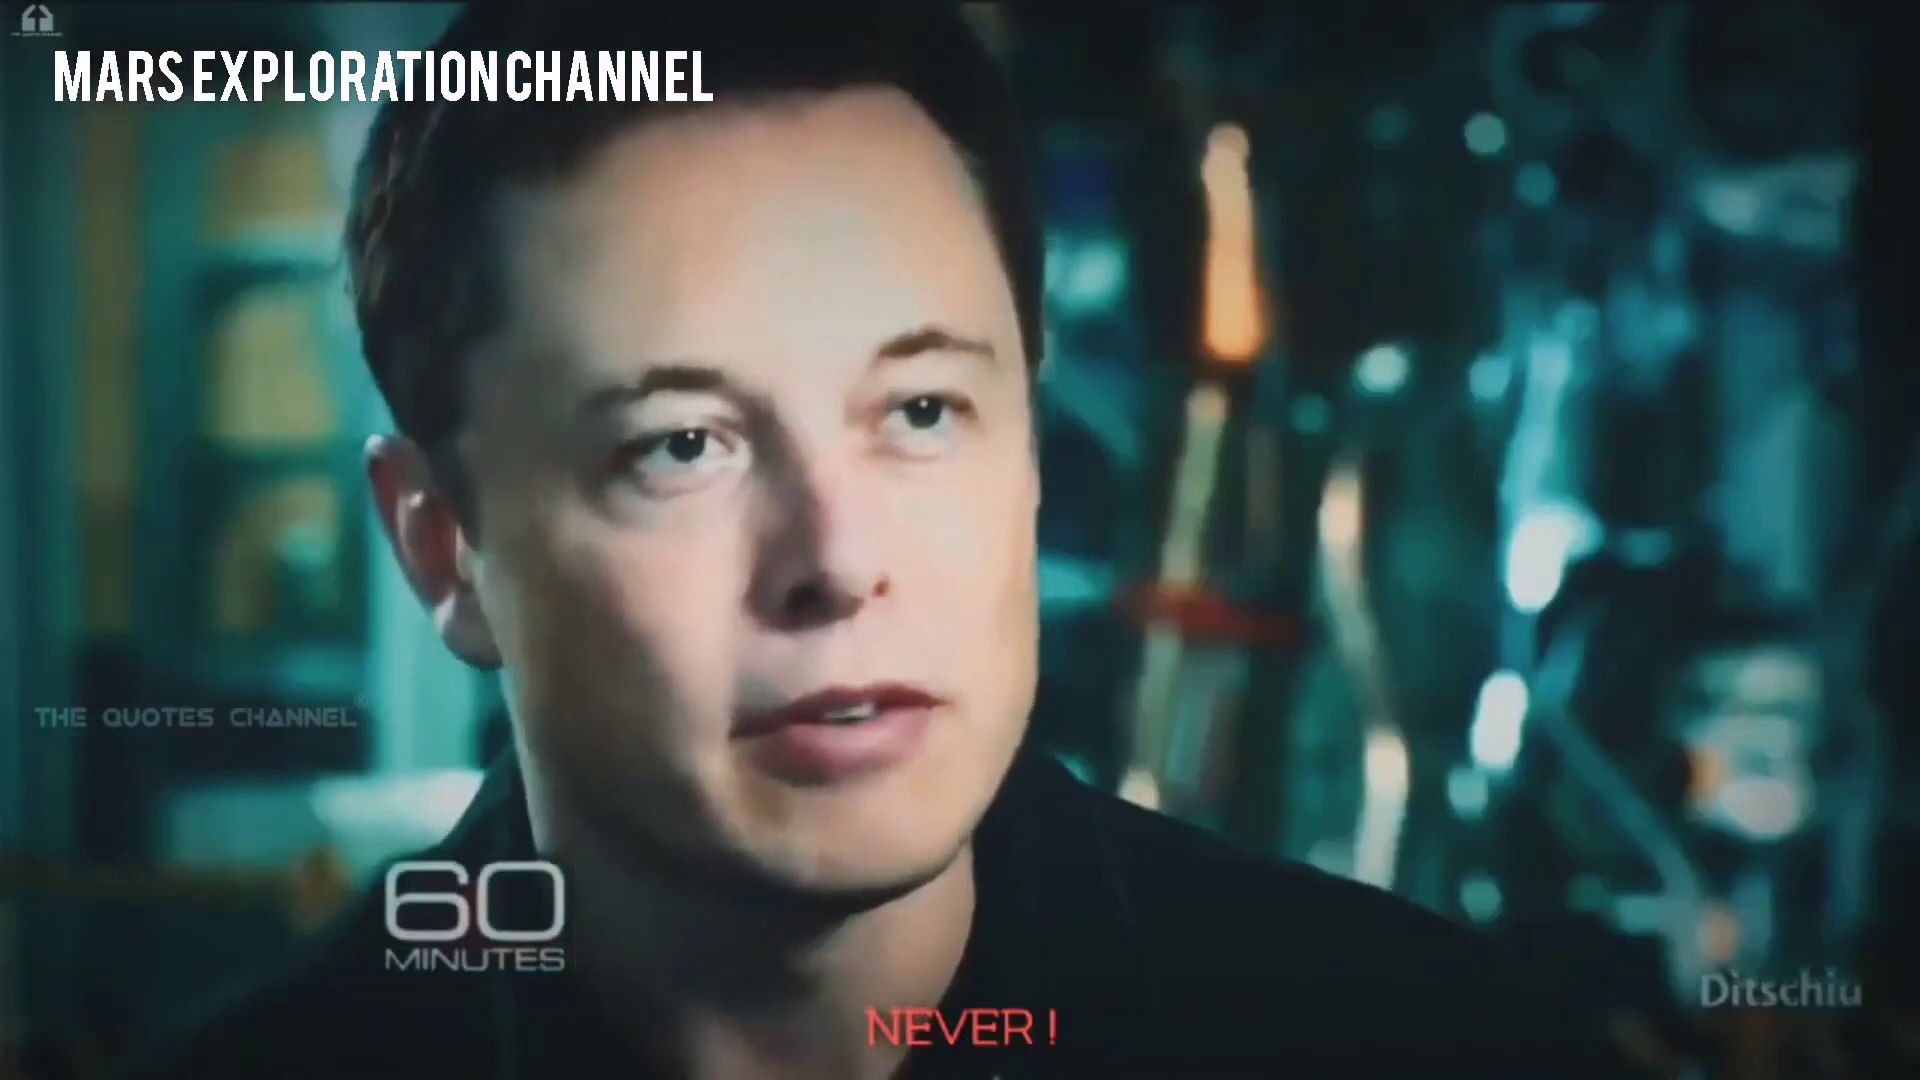 Never Give Up Elon Musk